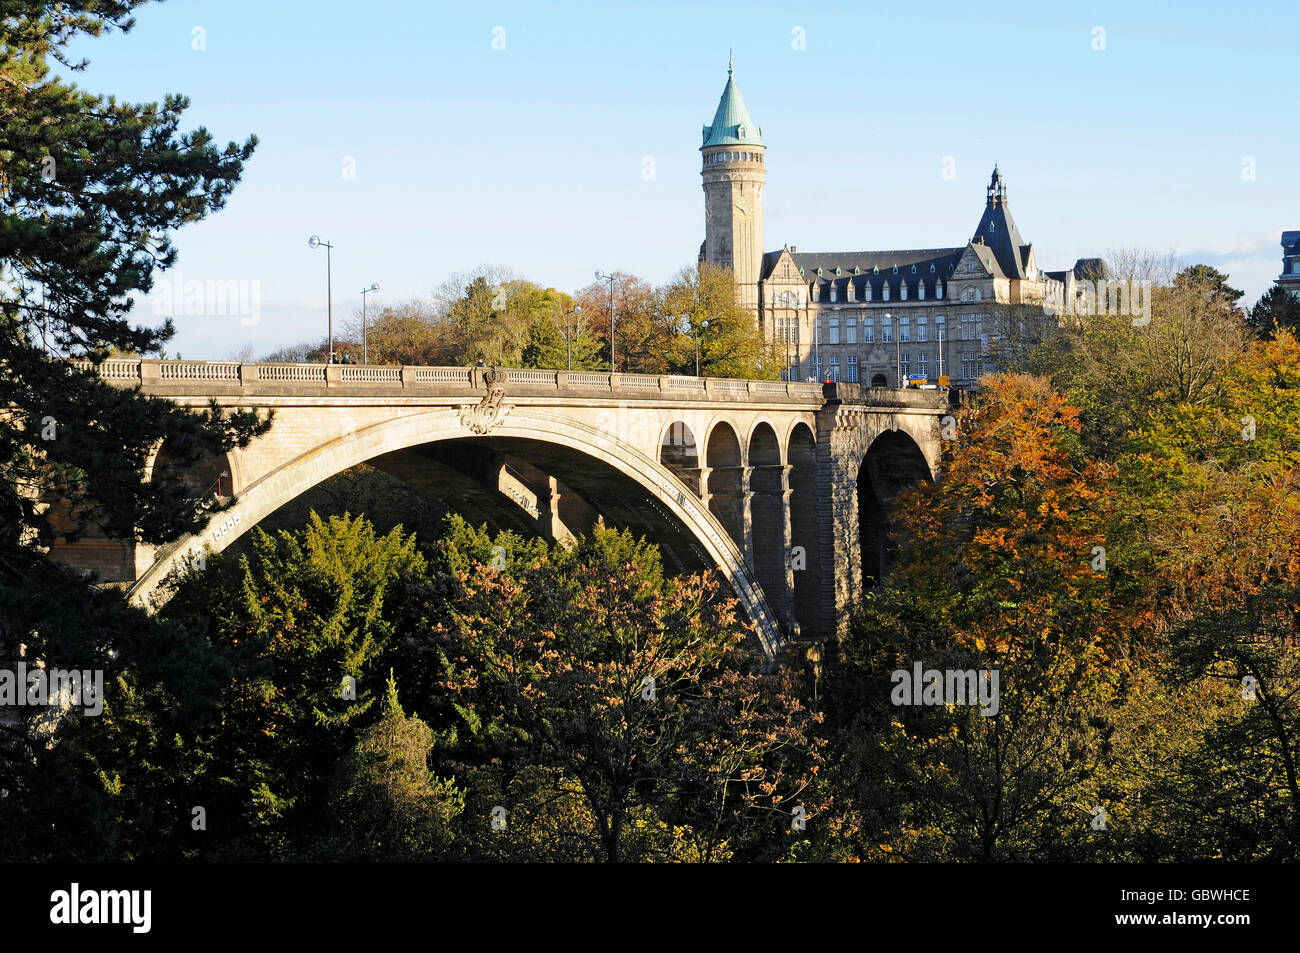 Adolphe bridge, Petrusse Valley, Petruss, Luxembourg city, Luxembourg Stock Photo